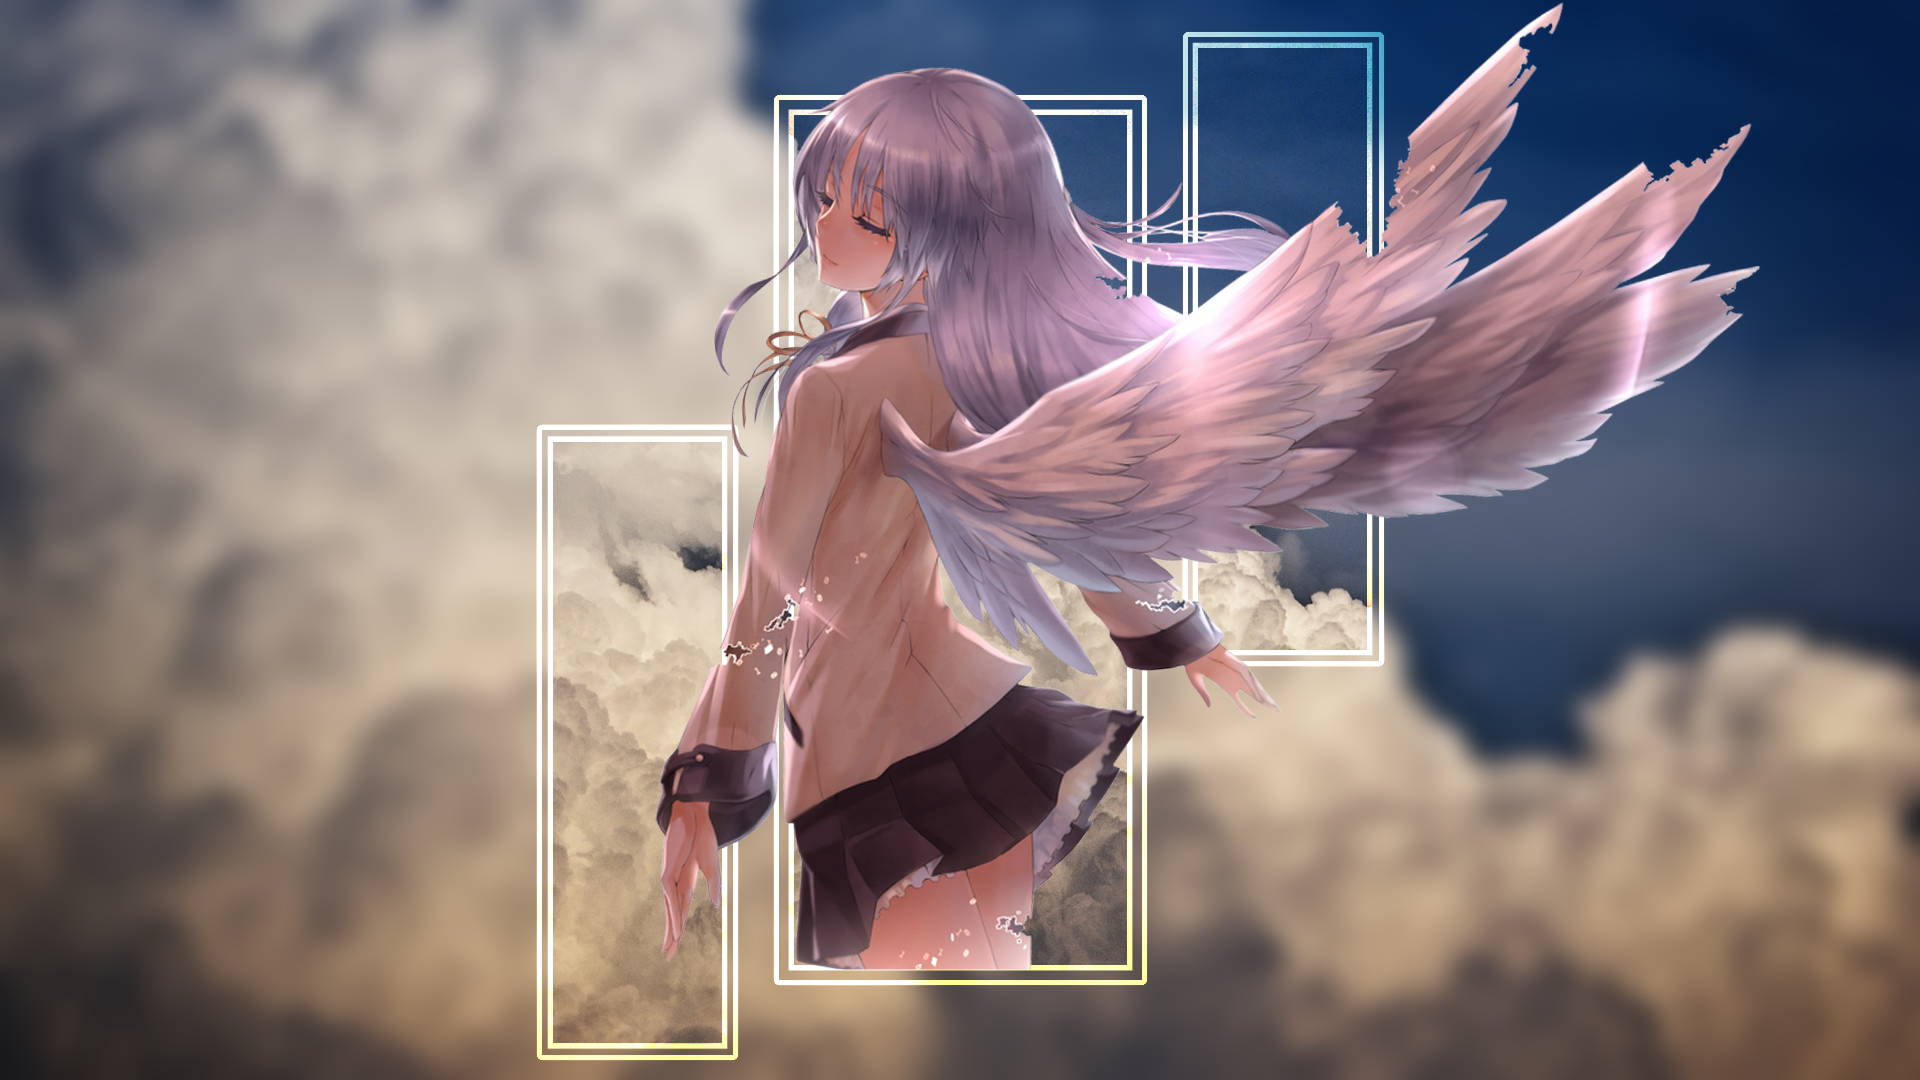 Anime 1920x1080 Angel Beats! angel wings clouds picture-in-picture